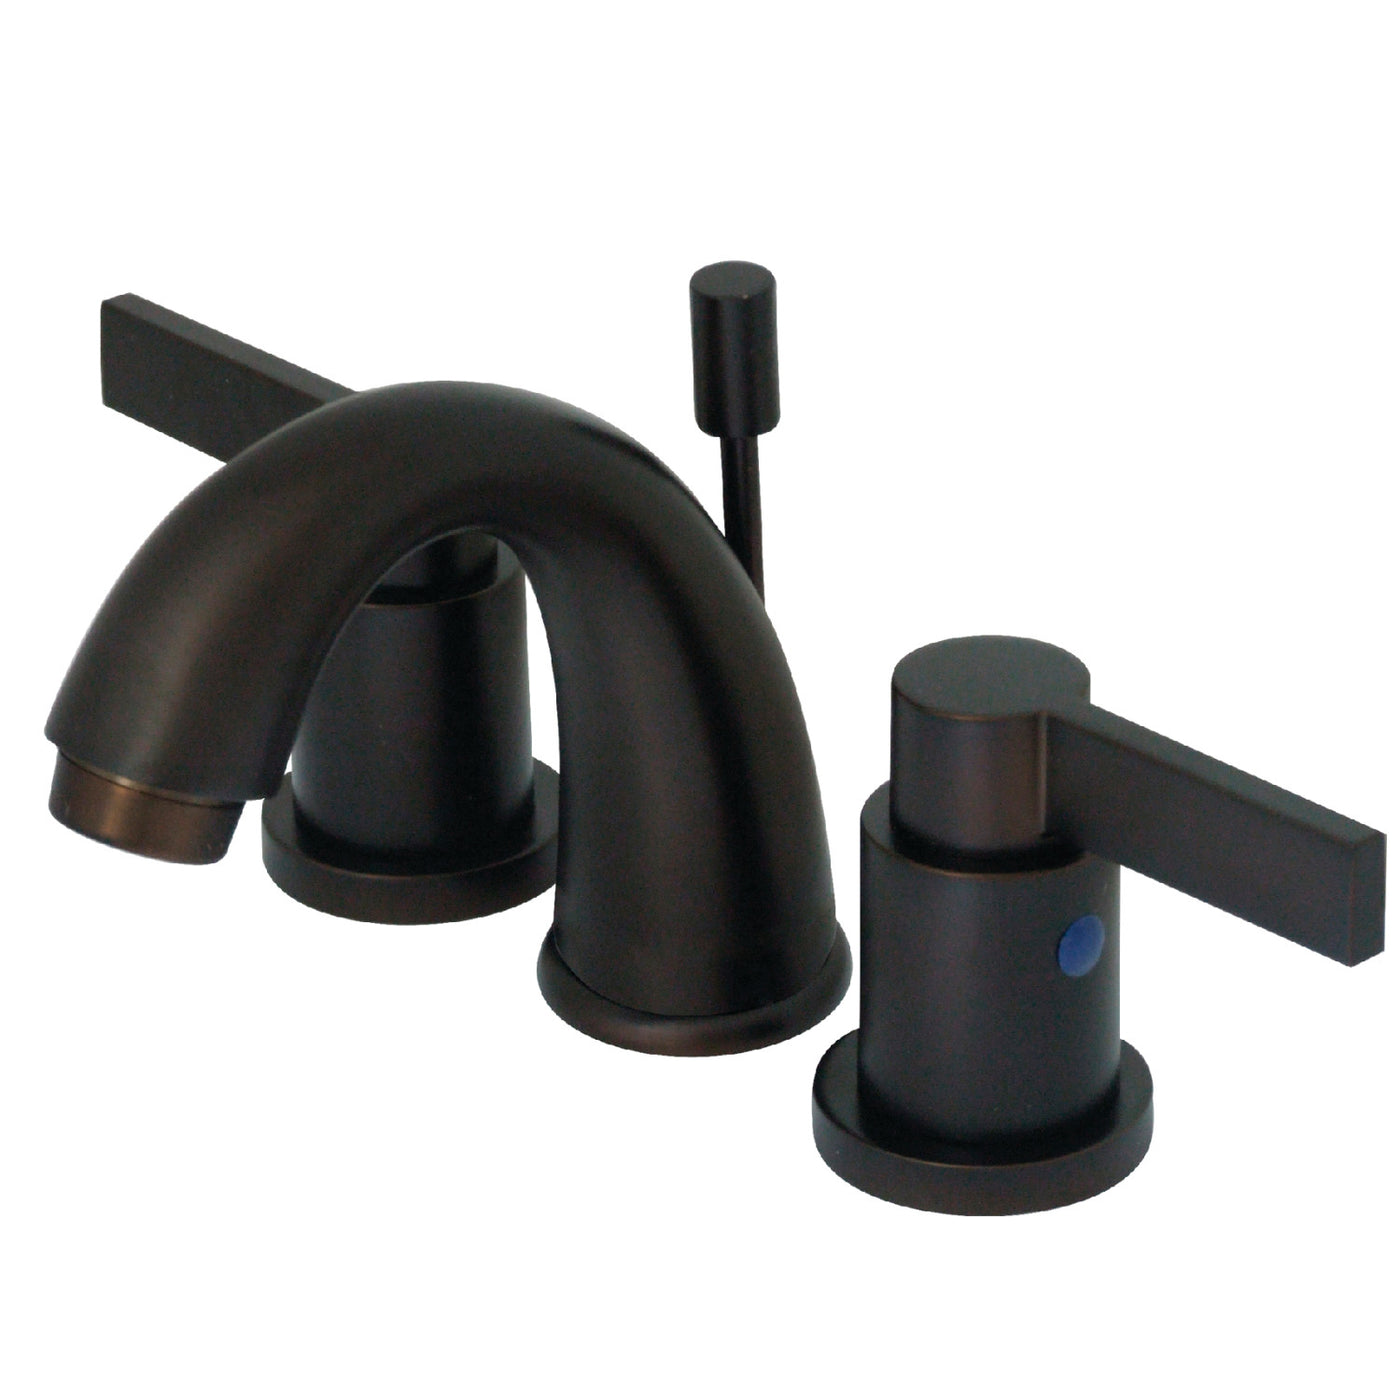 Elements of Design EB8915NDL Widespread Bathroom Faucet, Oil Rubbed Bronze